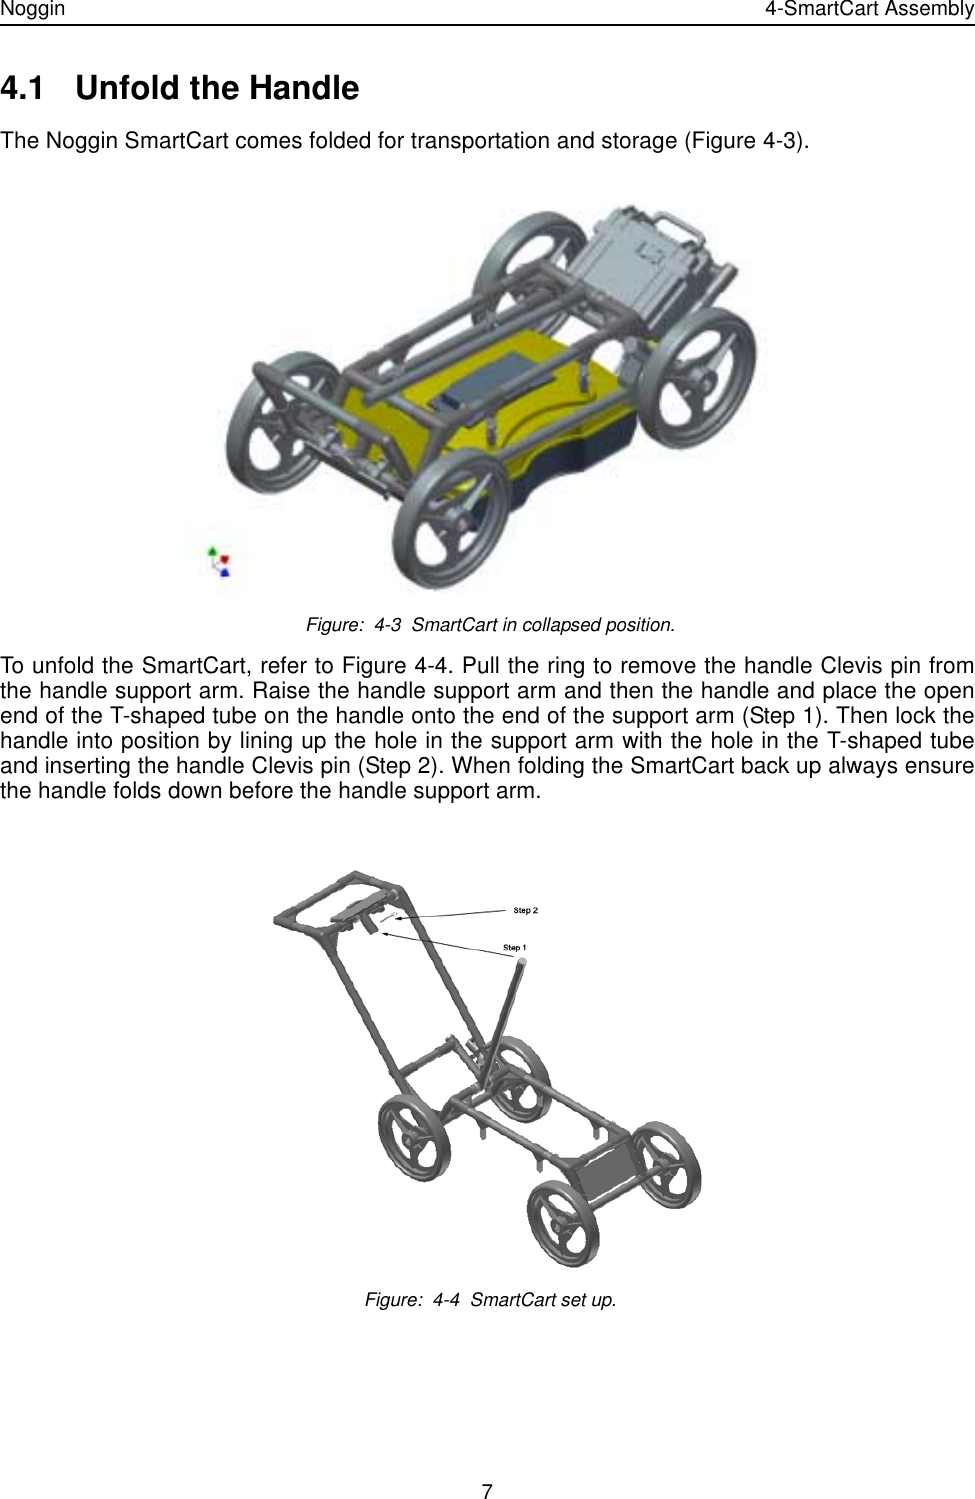 Noggin 4-SmartCart Assembly74.1 Unfold the Handle The Noggin SmartCart comes folded for transportation and storage (Figure 4-3).  Figure:  4-3  SmartCart in collapsed position.To unfold the SmartCart, refer to Figure 4-4. Pull the ring to remove the handle Clevis pin fromthe handle support arm. Raise the handle support arm and then the handle and place the openend of the T-shaped tube on the handle onto the end of the support arm (Step 1). Then lock thehandle into position by lining up the hole in the support arm with the hole in the T-shaped tubeand inserting the handle Clevis pin (Step 2). When folding the SmartCart back up always ensurethe handle folds down before the handle support arm. Figure:  4-4  SmartCart set up.